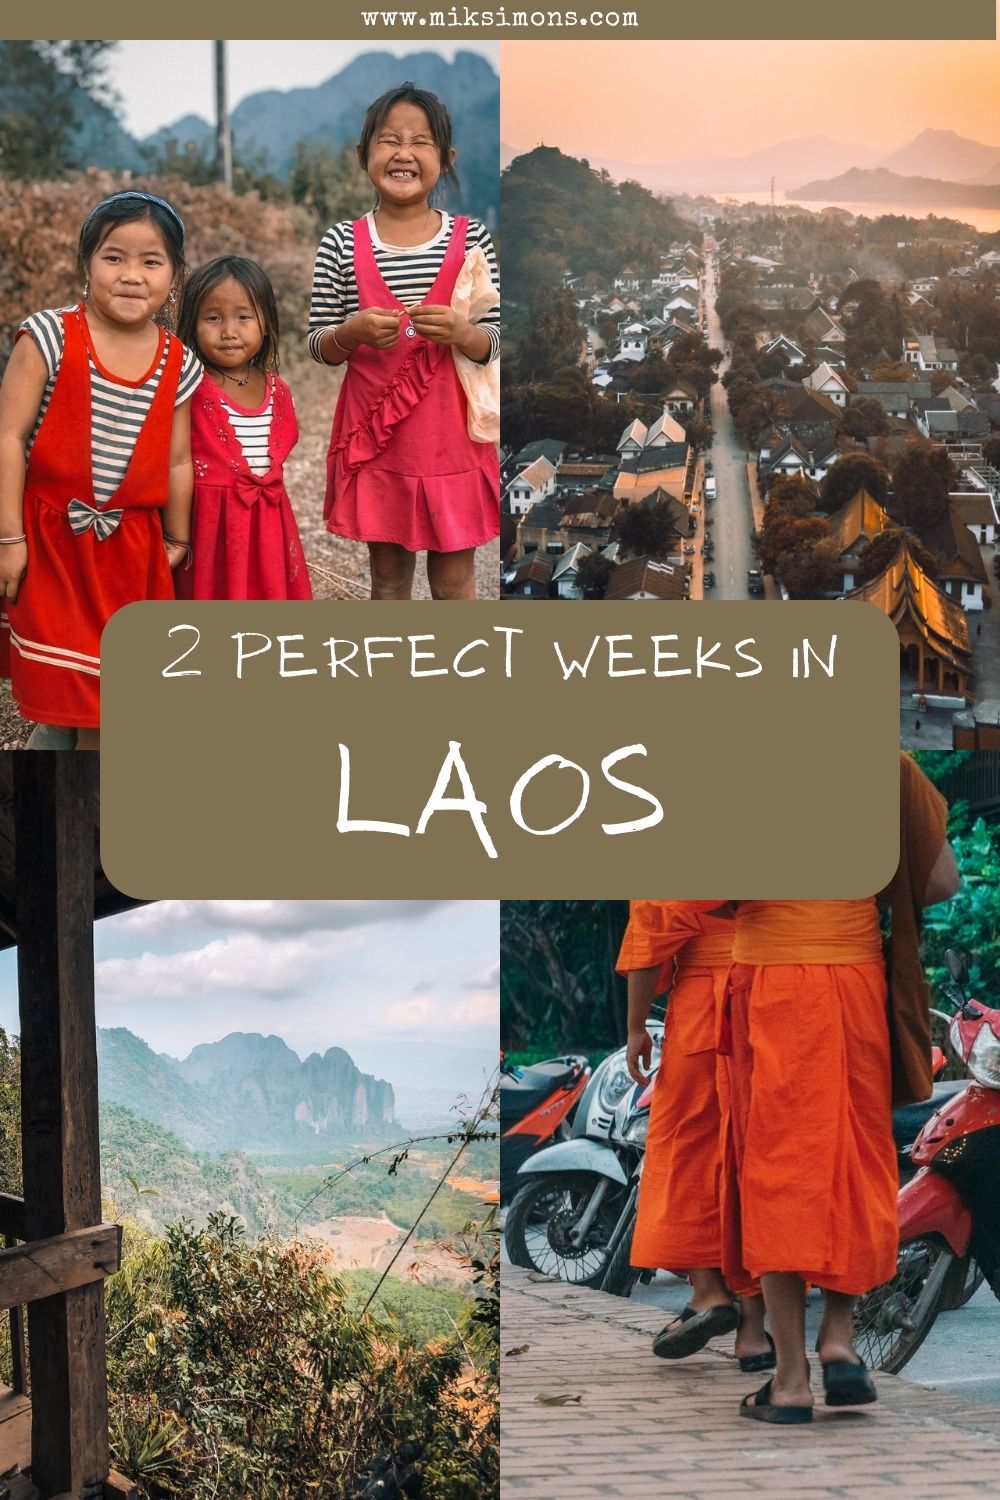 BACKPACKING IN LAOS - THE BEST 2 WEEKS IN LAOS ITINERARY